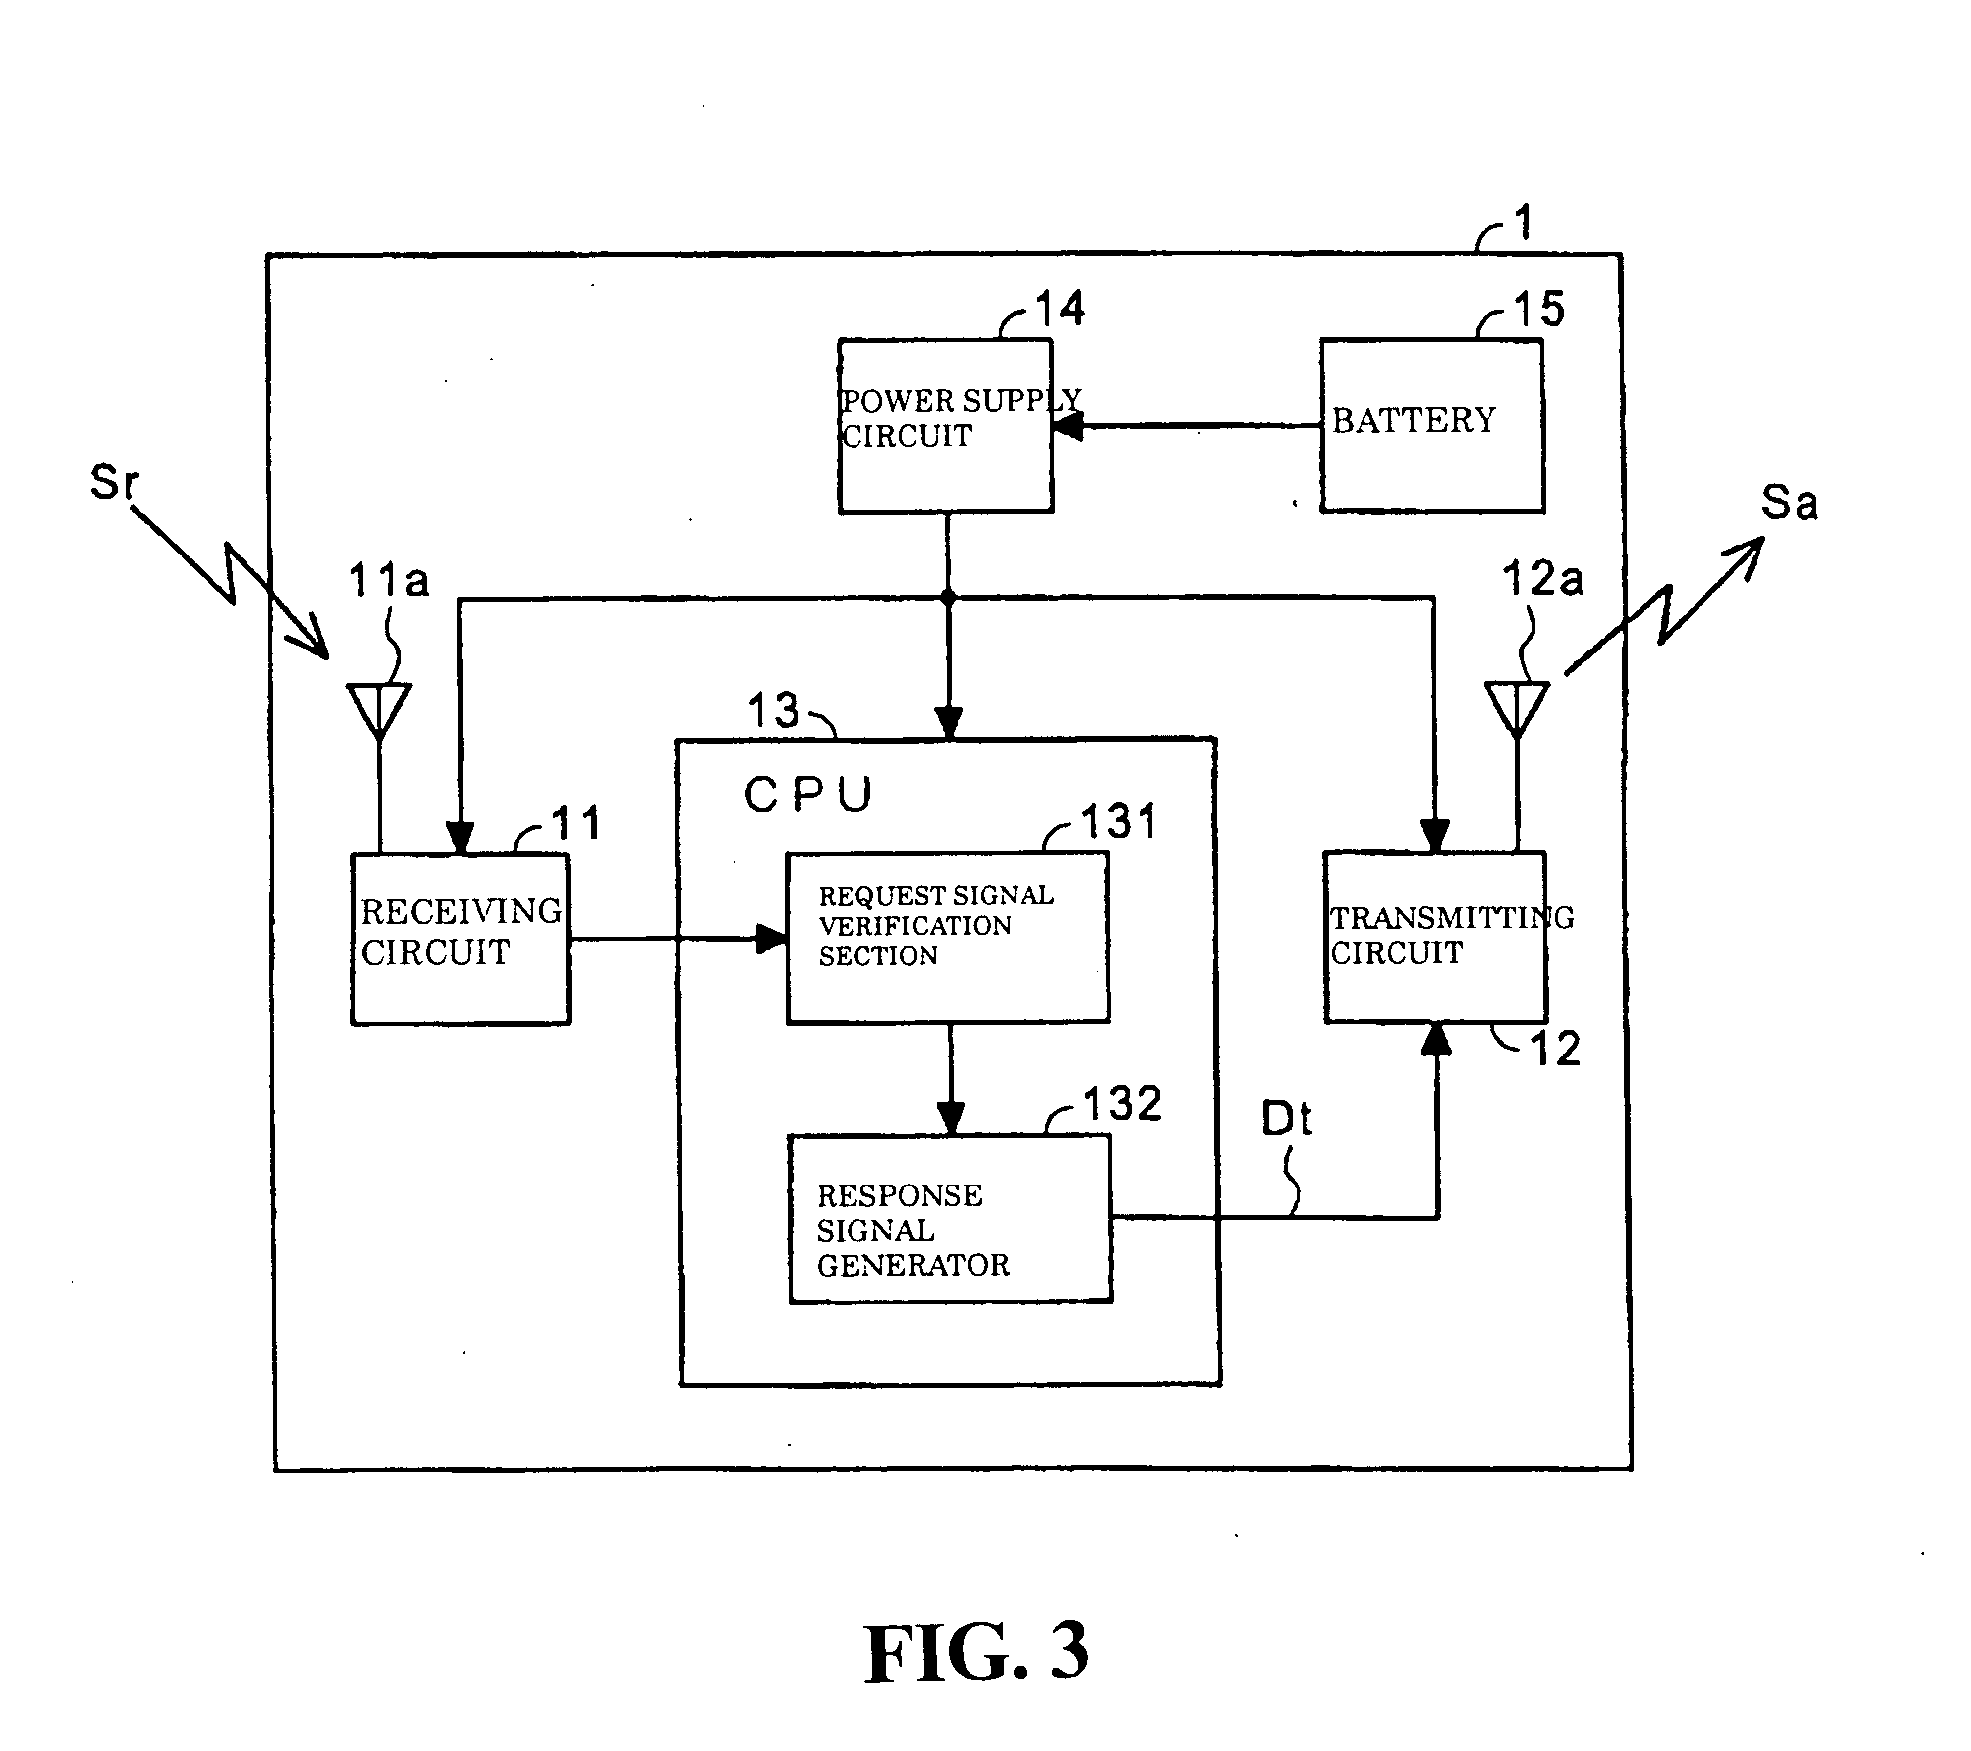 Monitoring apparatus for electronic key and displaying apparatus for positional information on electronic key